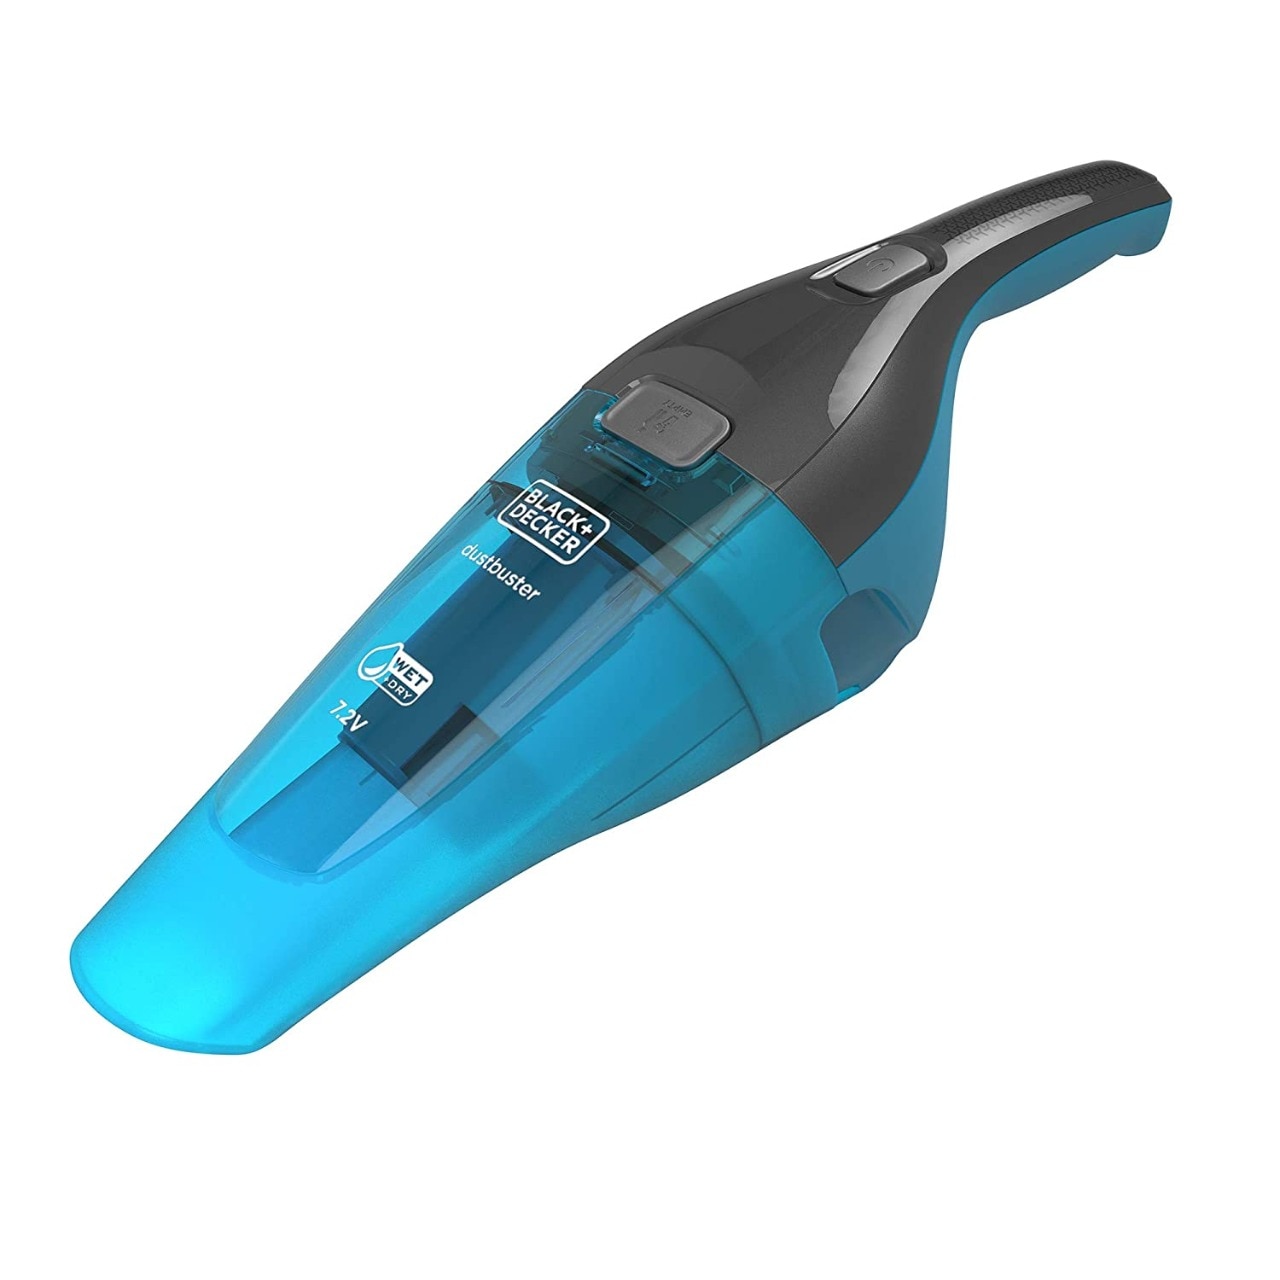 Amazon Festival Sale: Best 5 cordless vacuum cleaners for home and car are available in Amazon's sale for just Rs.